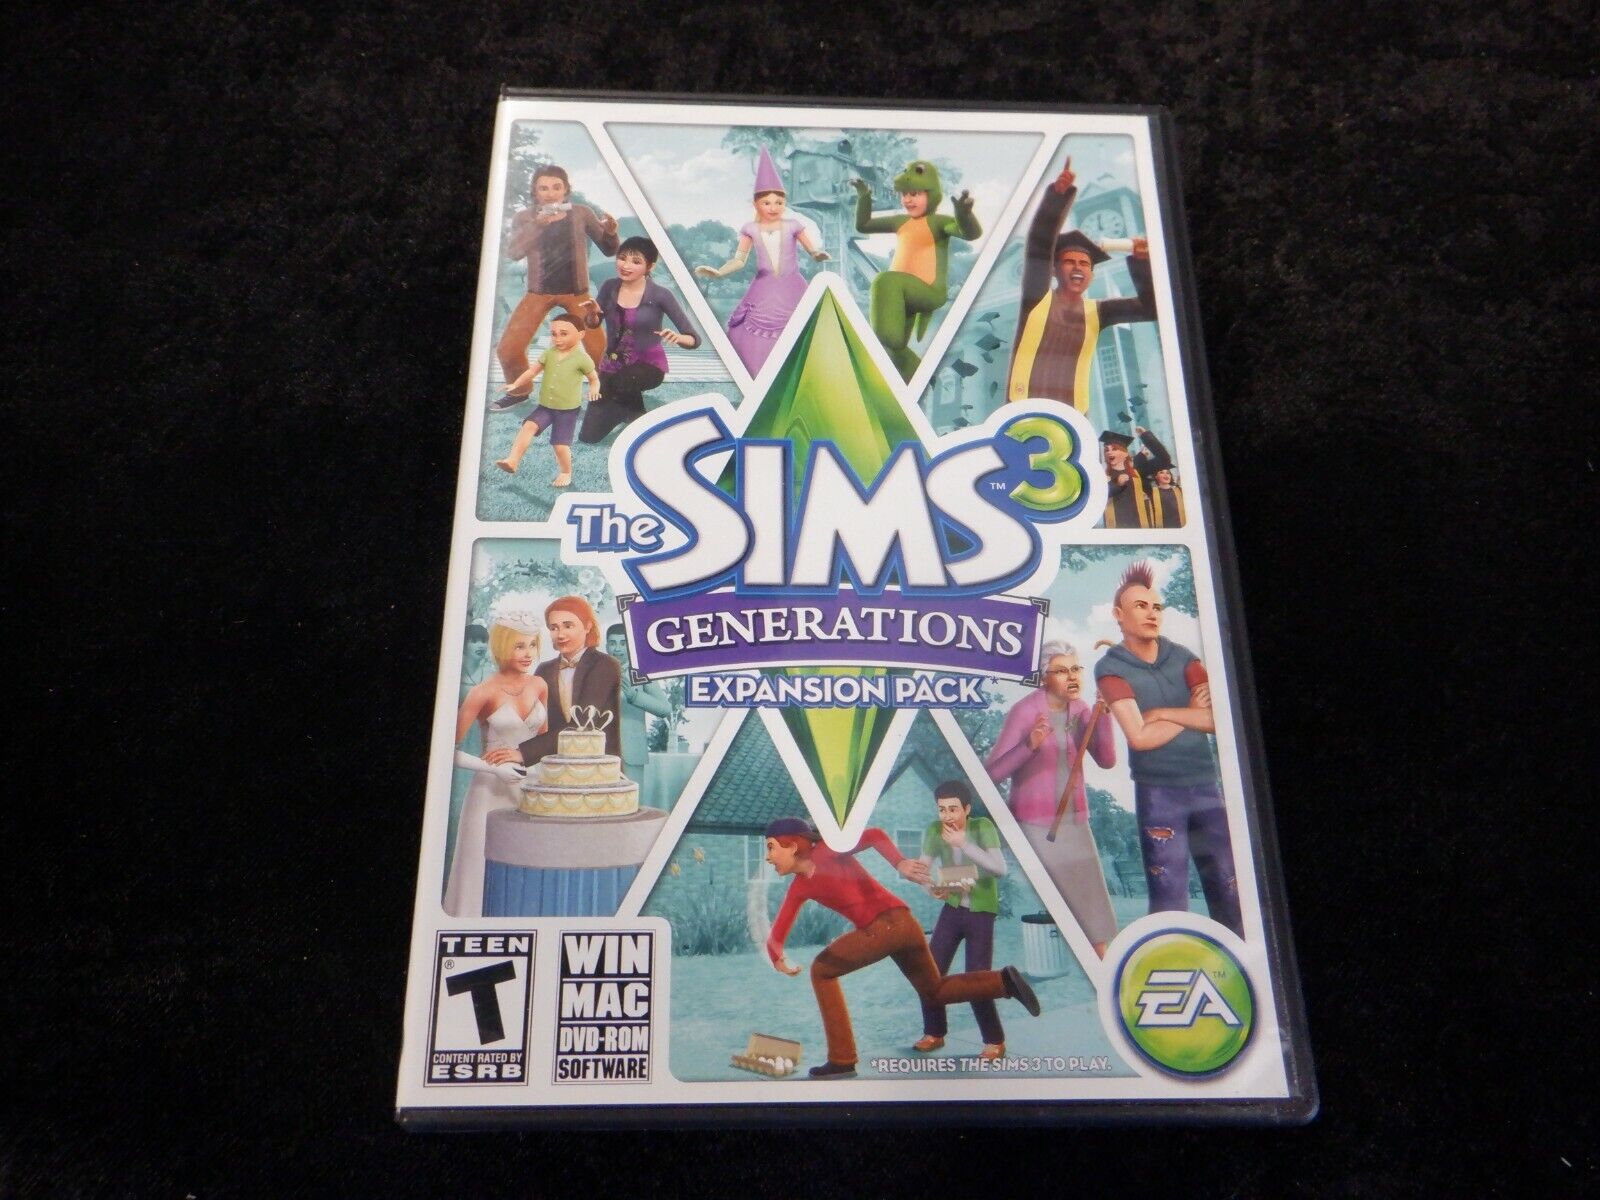 Jordbær browser Sygdom Video Games - Sims 3: Generations Expansion Pack - Great Condition | eBay